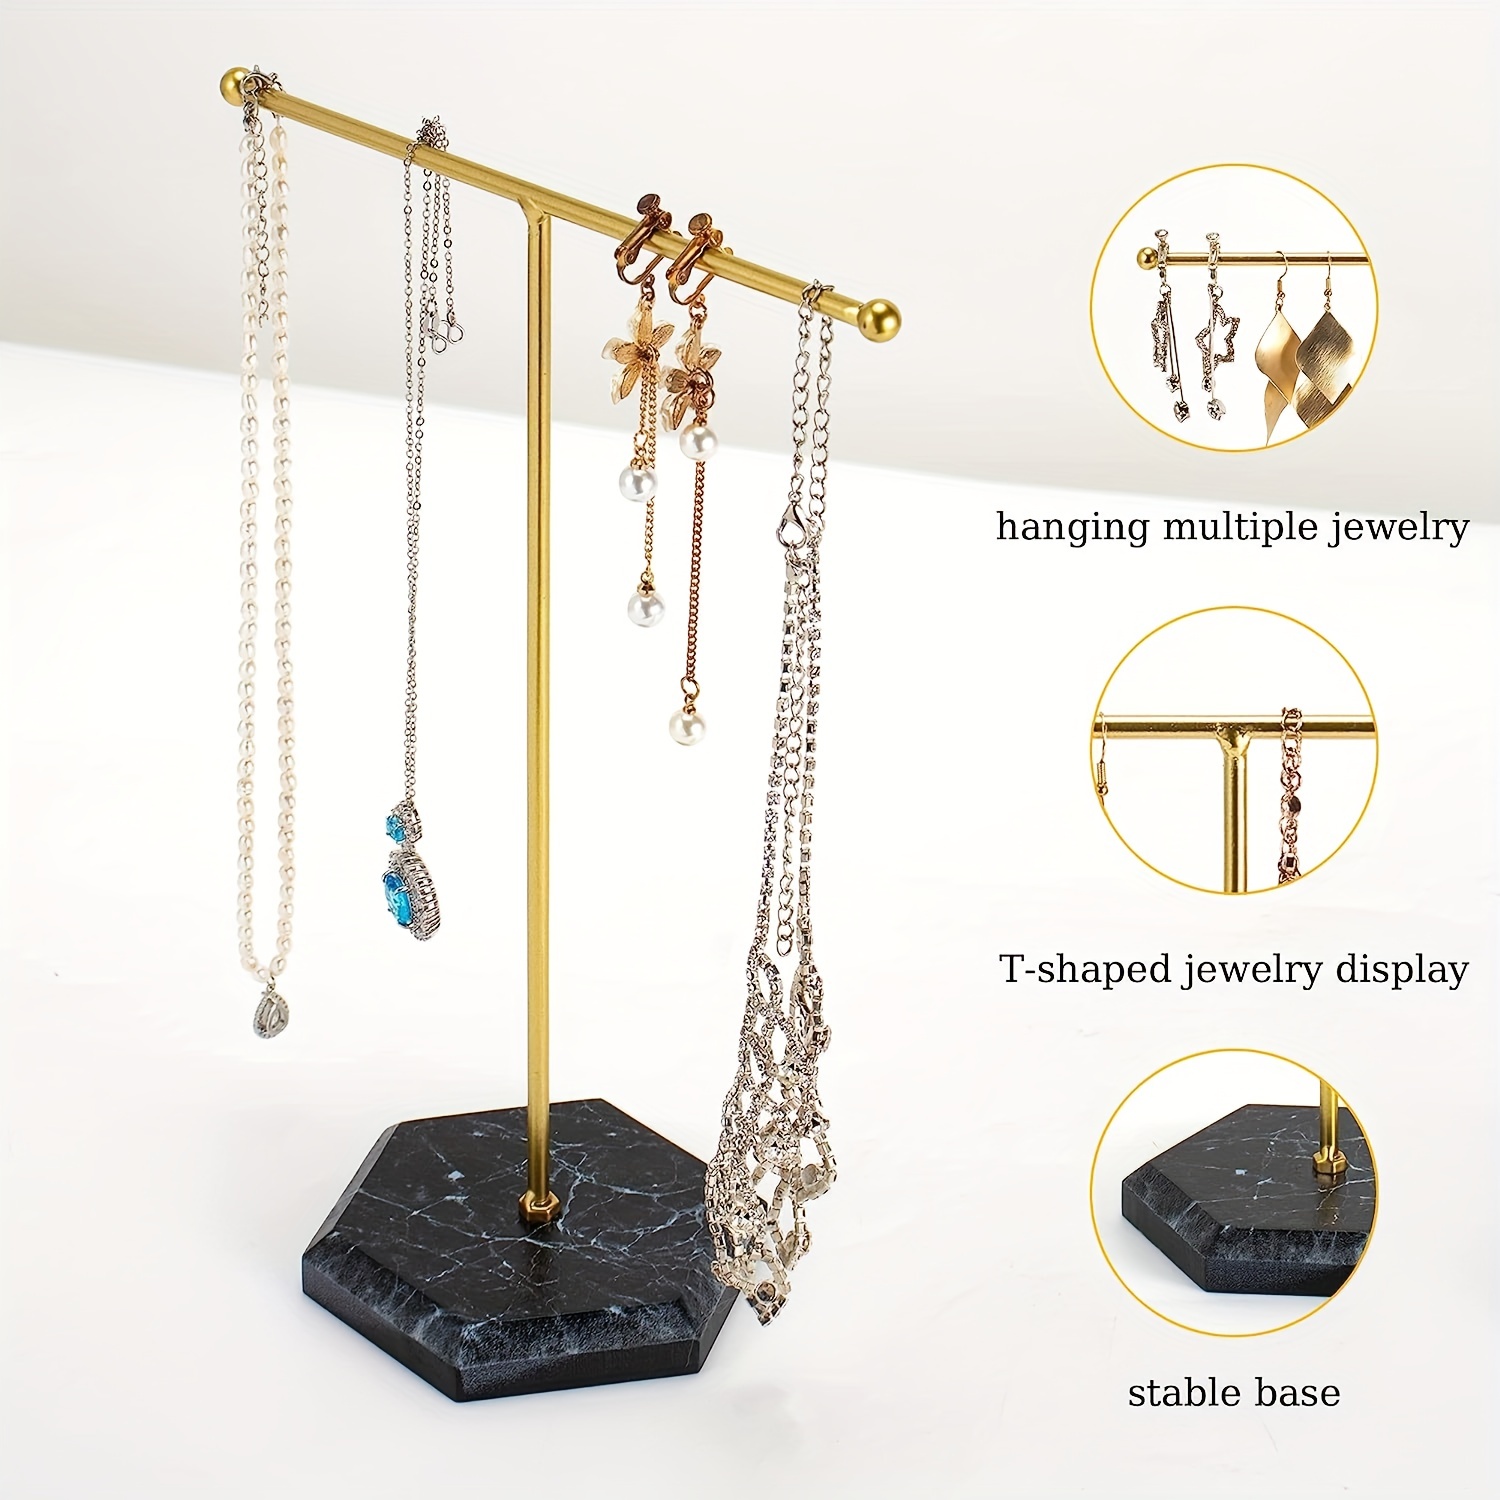 Dropship 3 Tier Gold Metal Tabletop Jewelry Display Tree Stand Organizer  Holder Rack Hanger Tower For Bracelet Necklace Accessories With Ring Tray  to Sell Online at a Lower Price